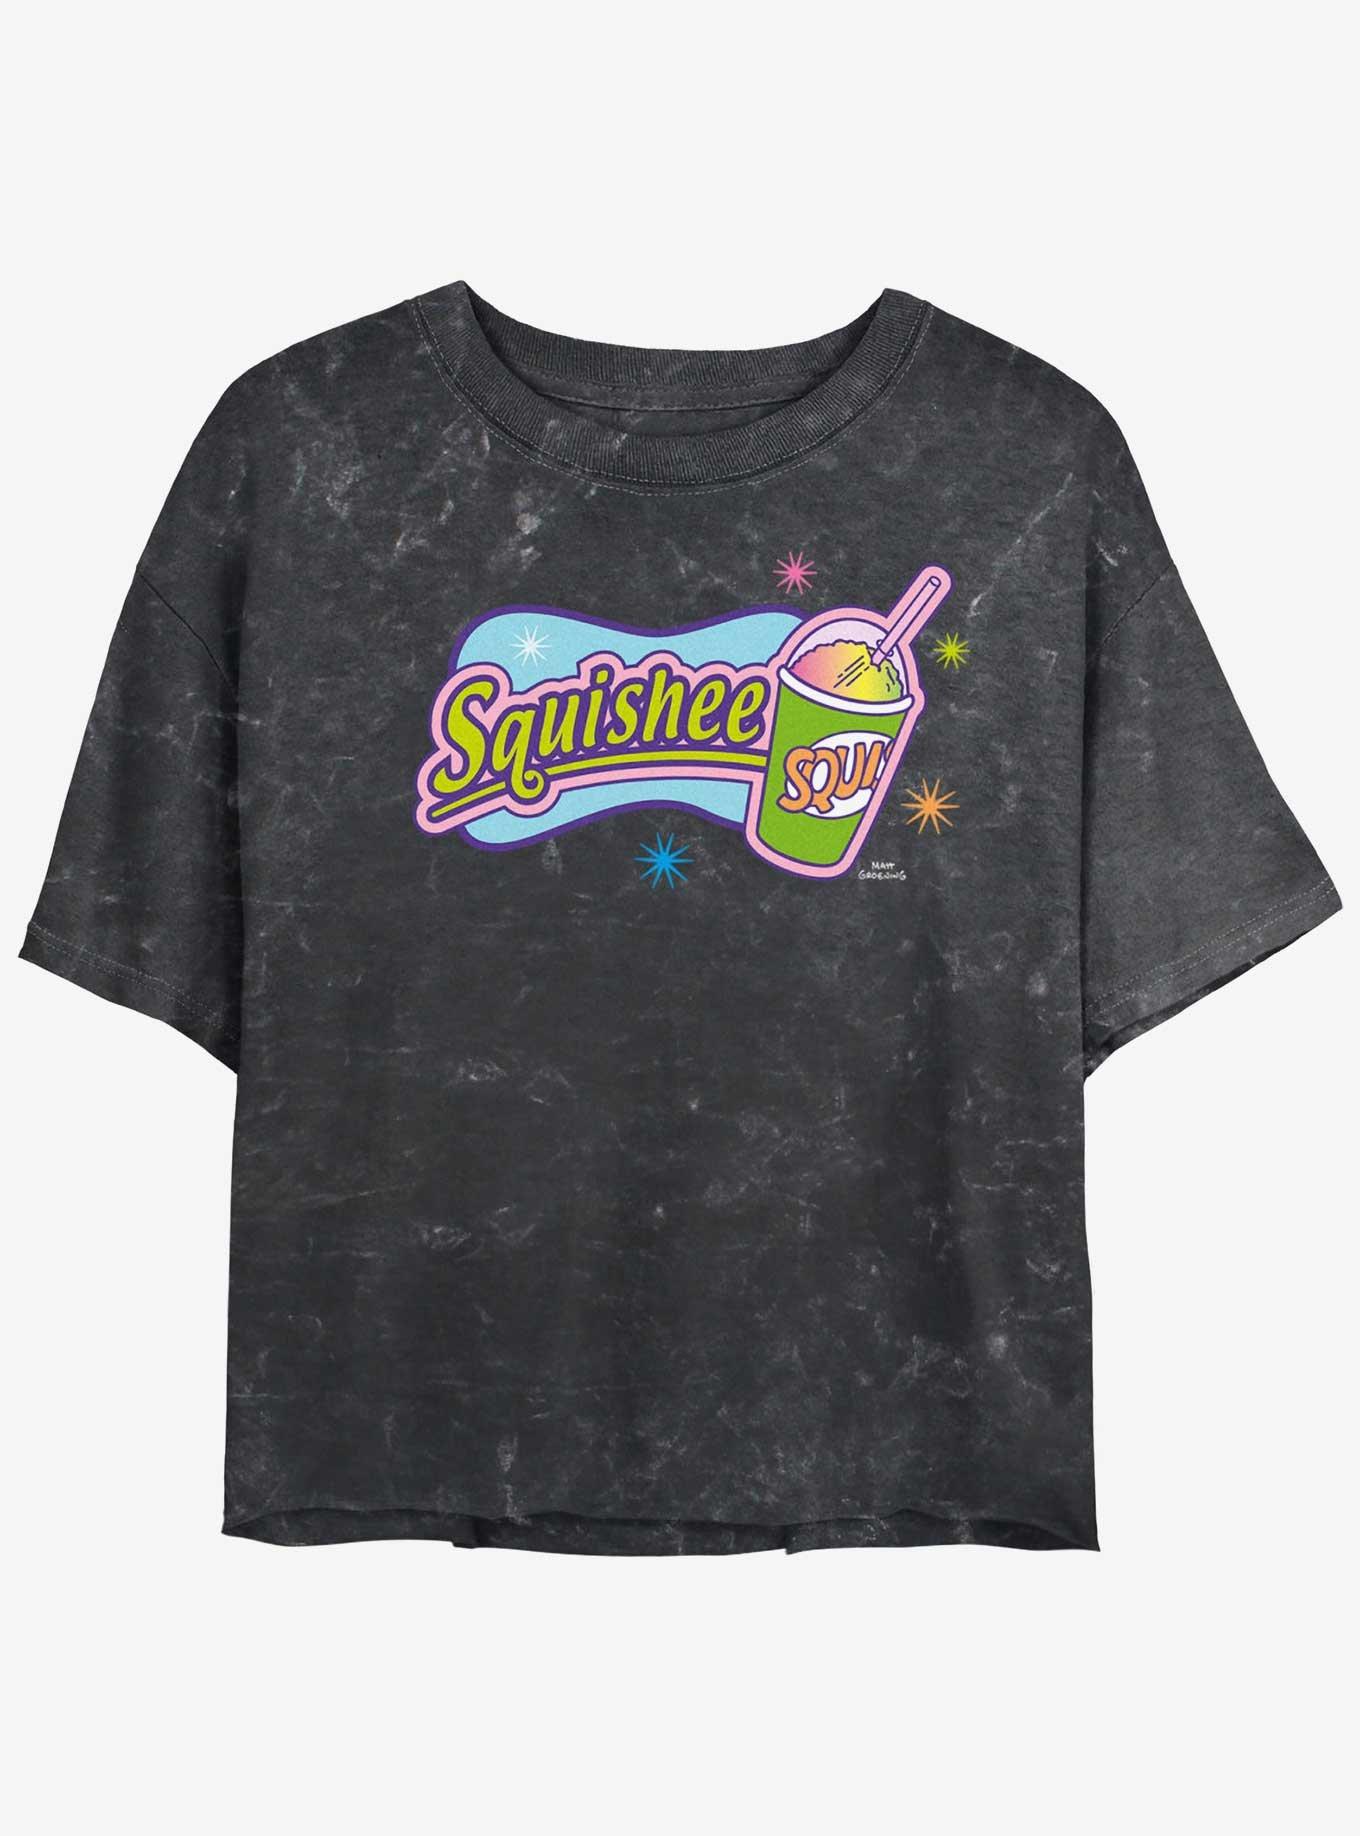 The Simpsons Squishee Logo Mineral Wash Womens Crop T-Shirt, BLACK, hi-res